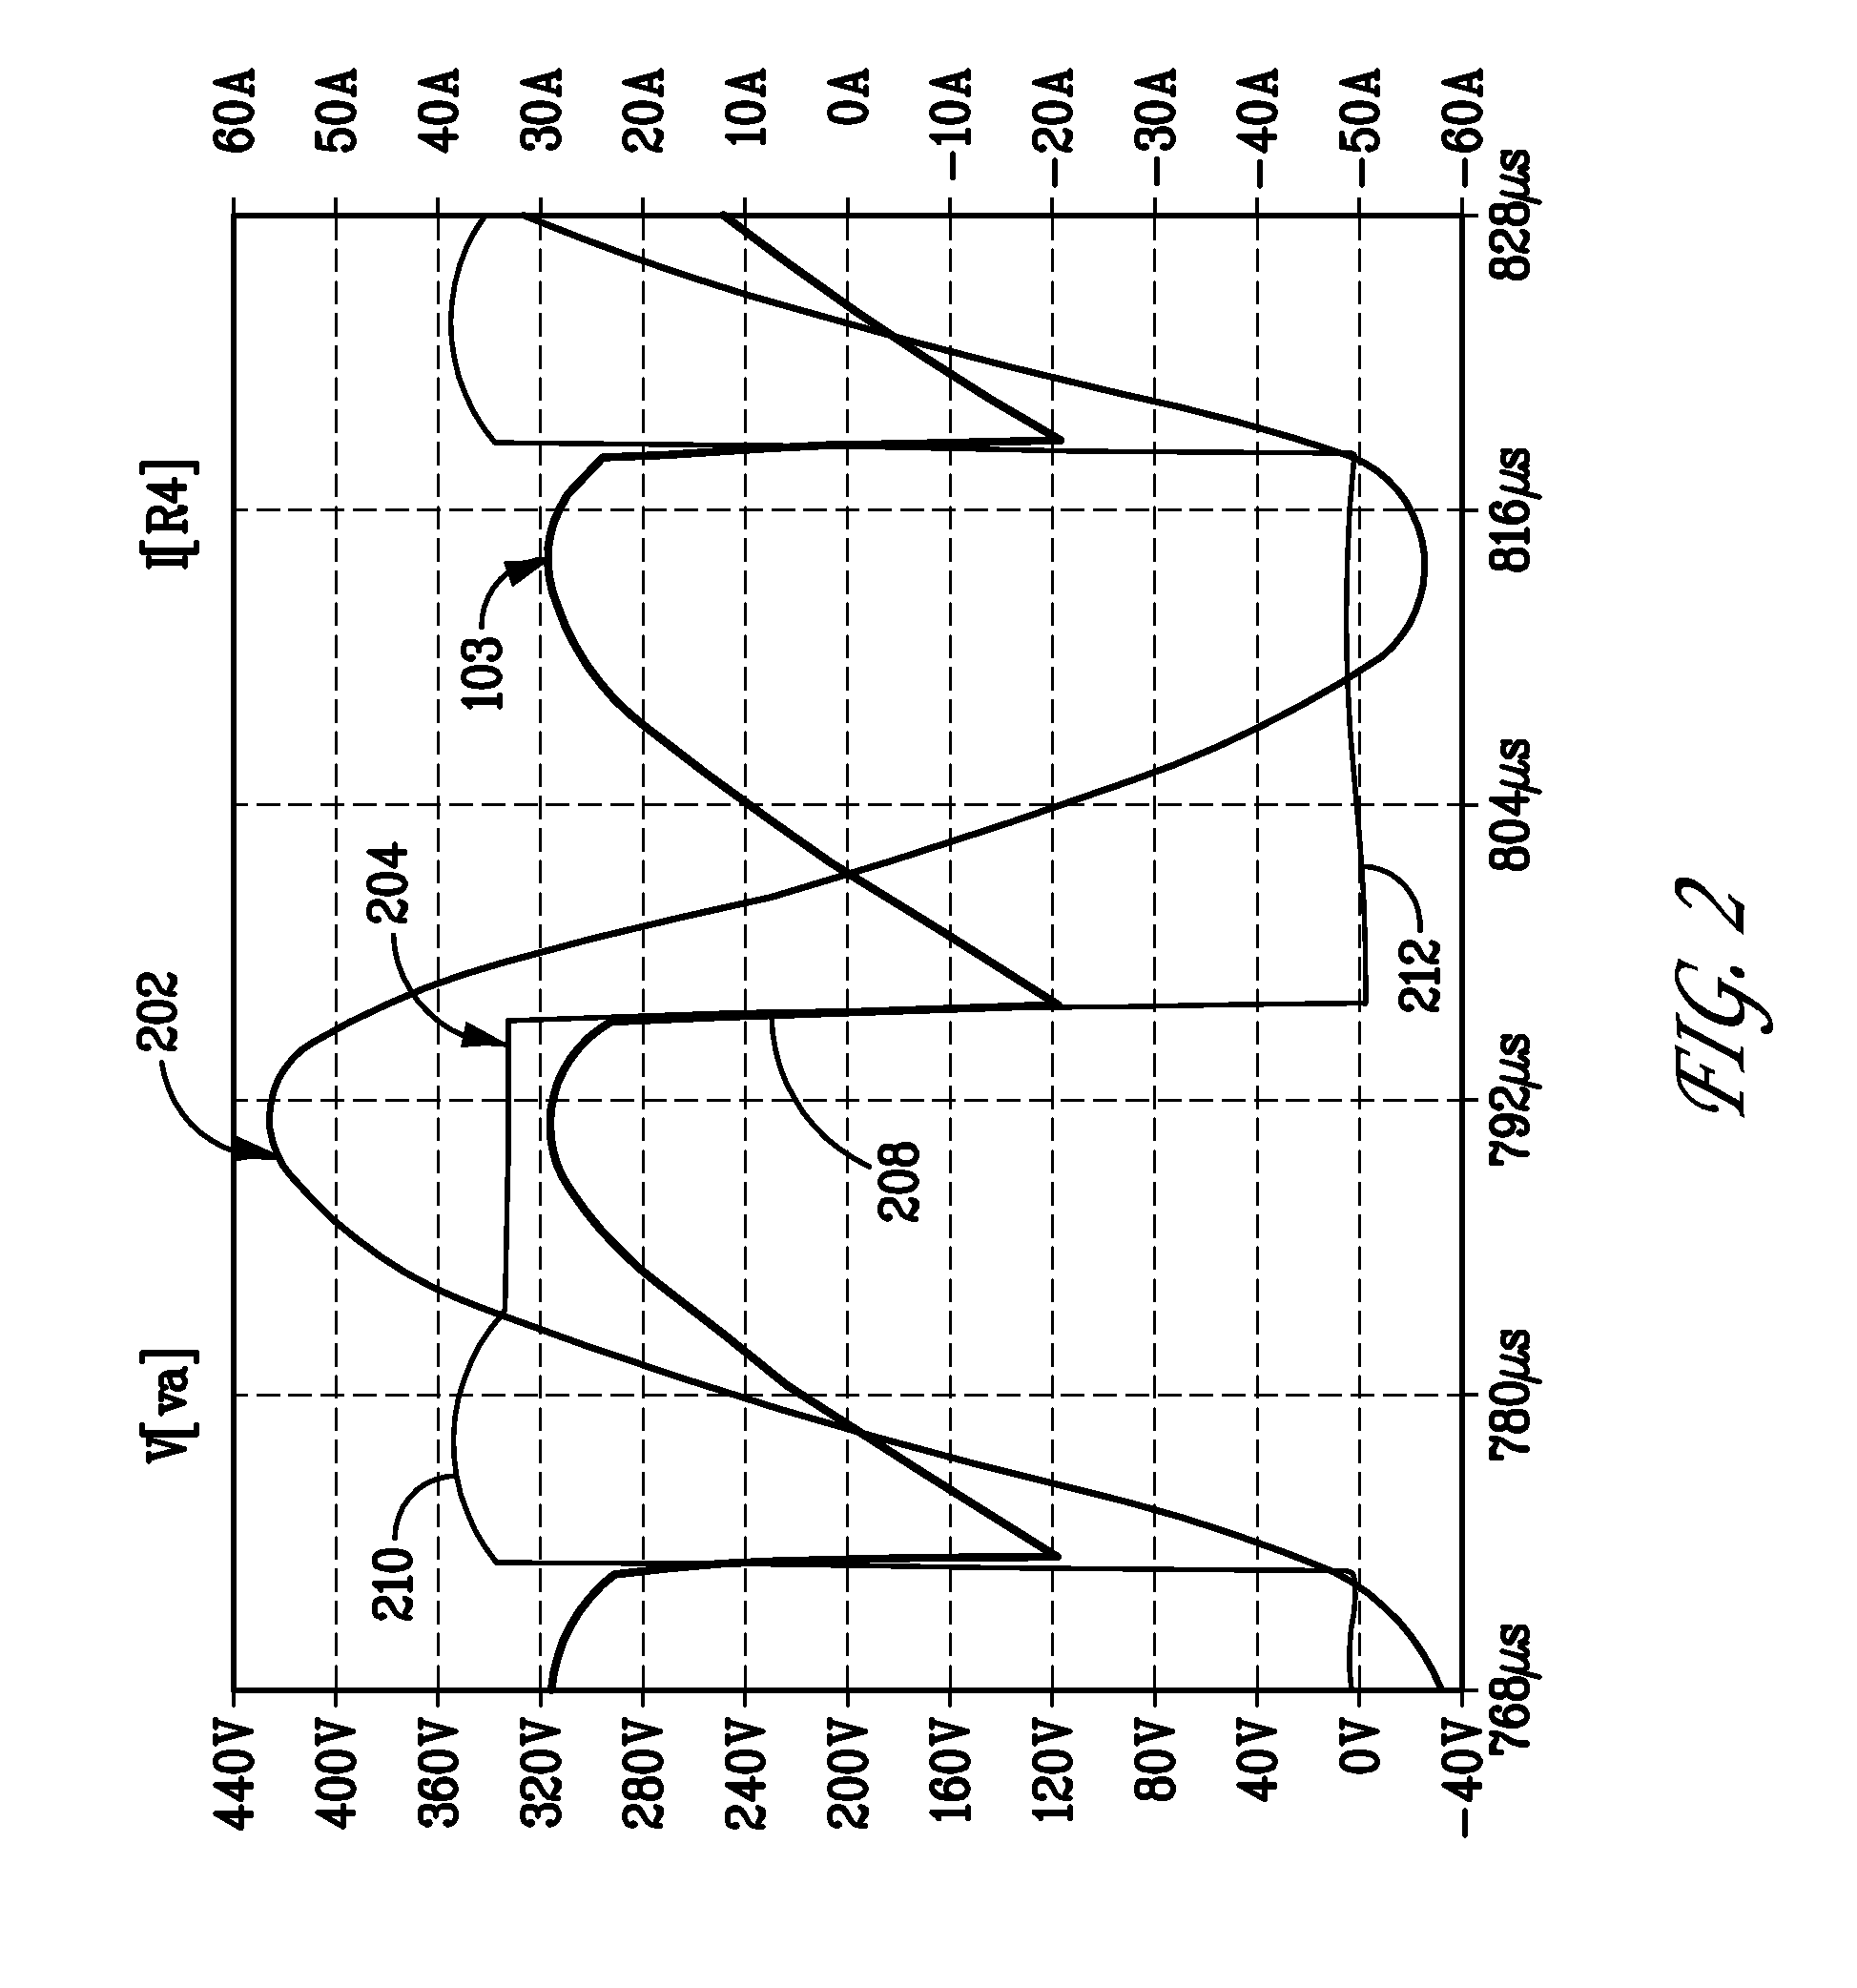 Resonant frequency detection for induction resonant inverter